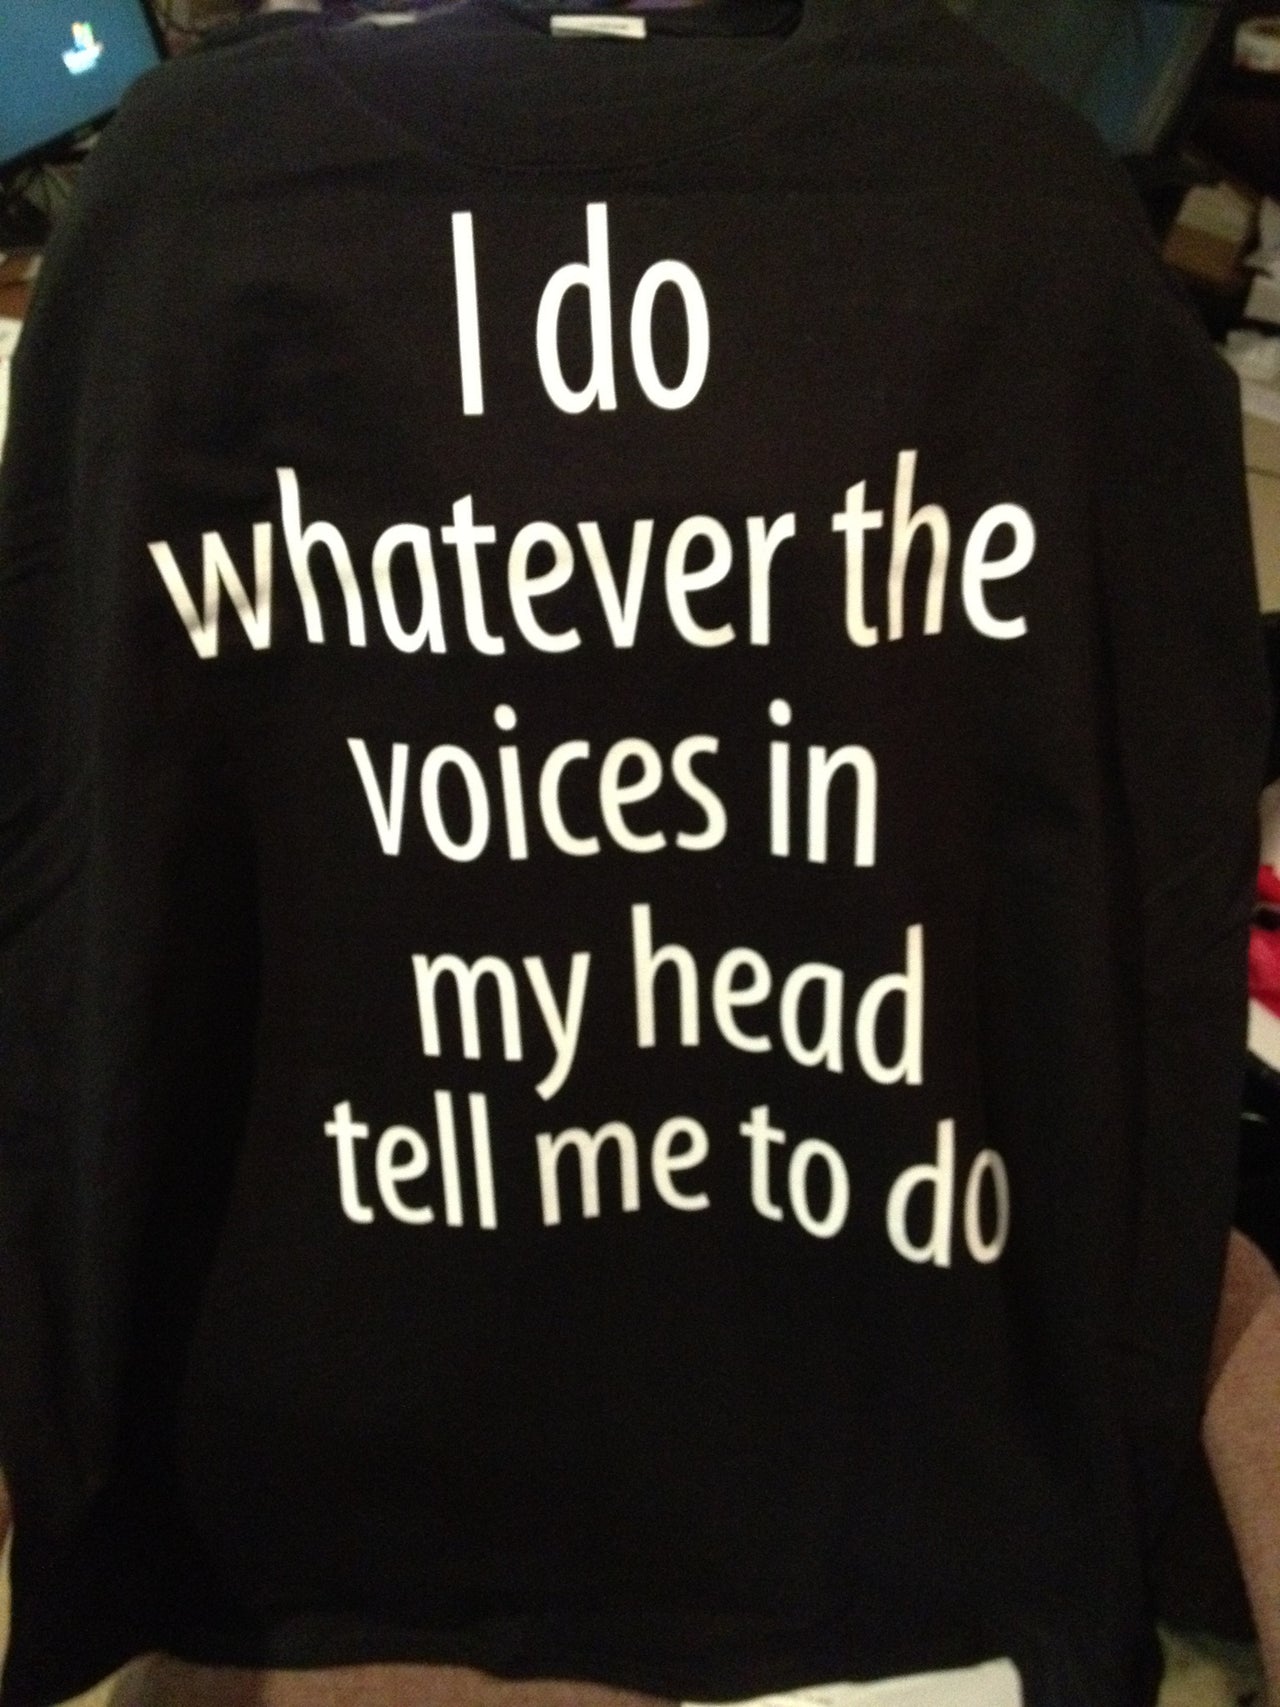 "I Do Whatever The Voices in My Head Tell Me to Do" Tshirt - TshirtNow - 2